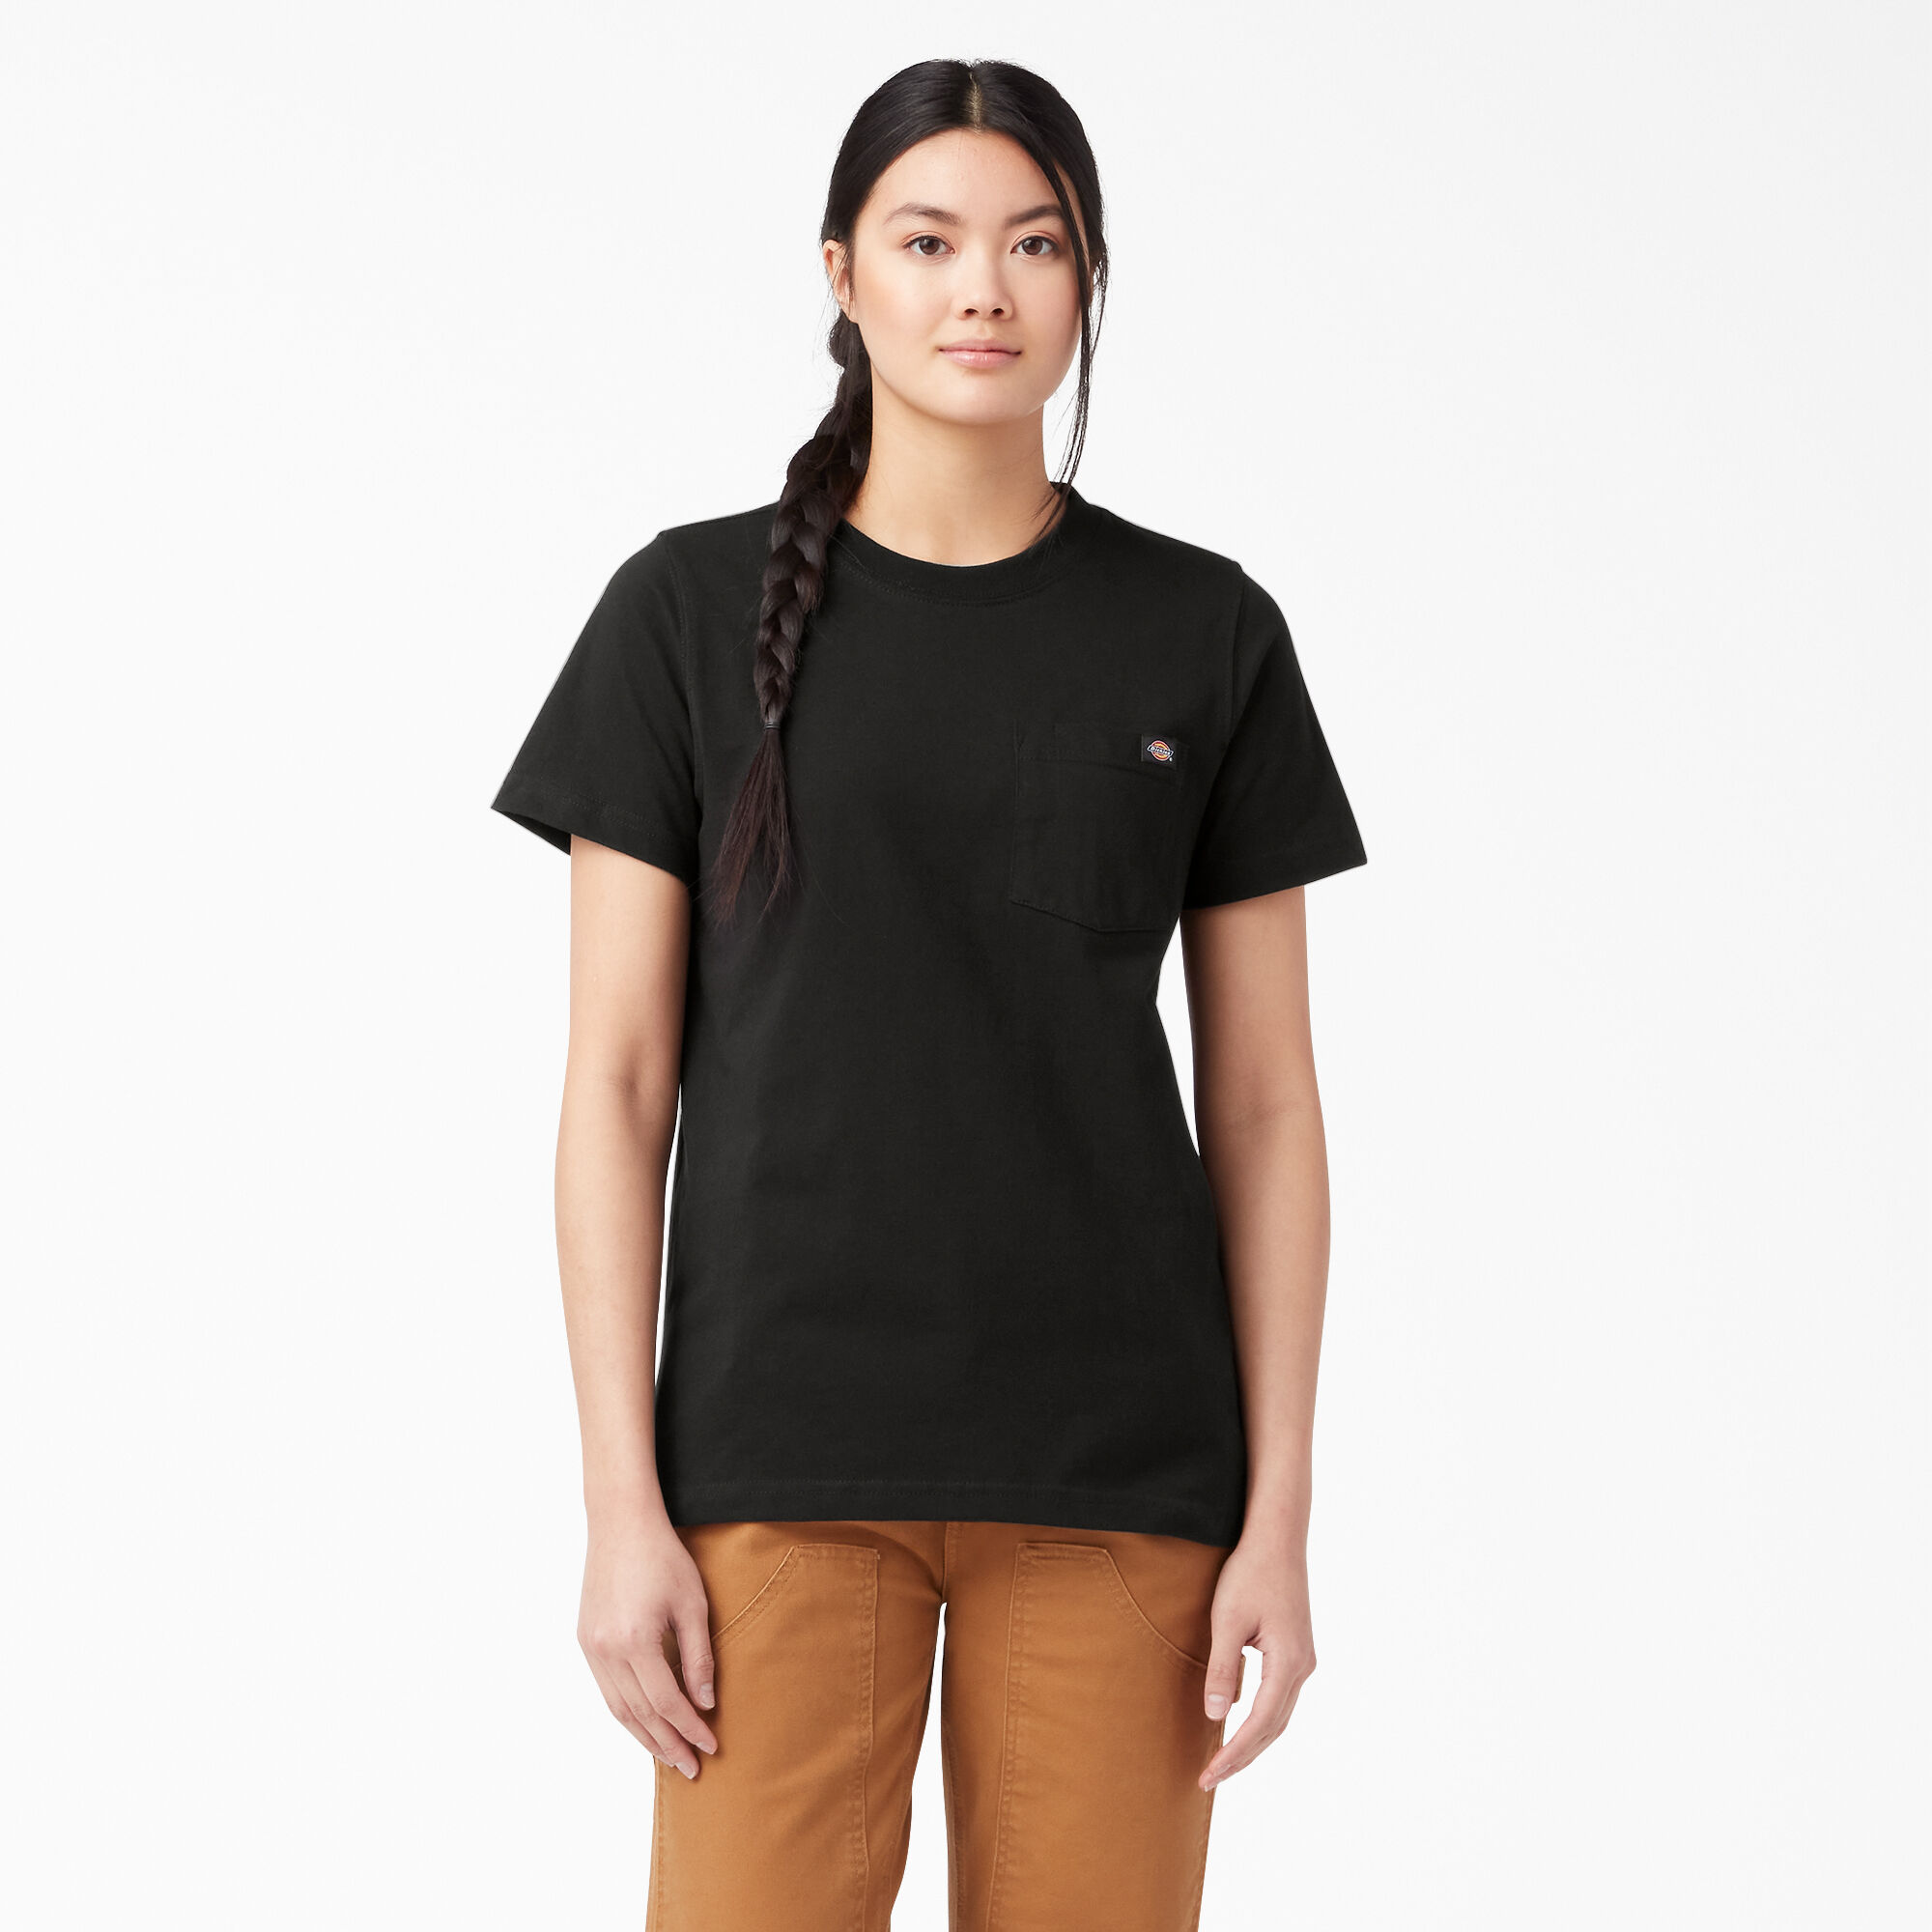 Los Angeles Apparel | Wide T-Shirt for Women in Off White, Size XS